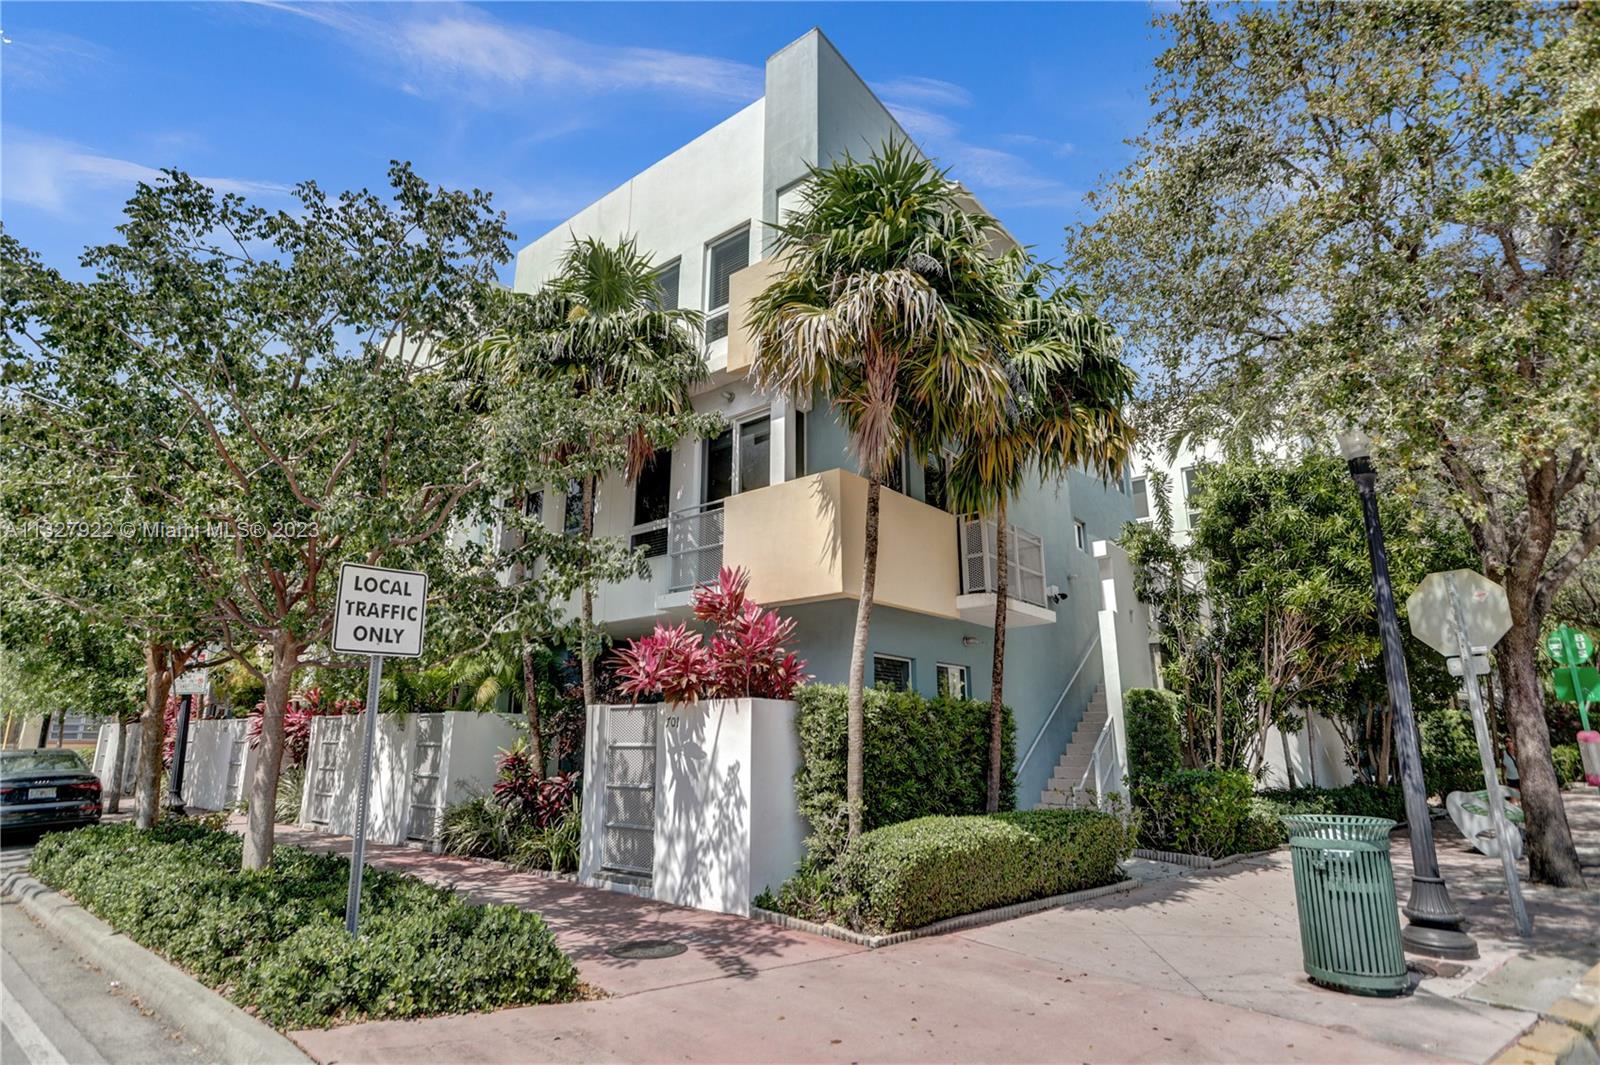 This tri-level townhome built in 2000 is in the famed "South of Fifth" chic neighborhood of South Beach. This 2 beds and 1.5 bath home is only 2 blocks from the clear blue Ocean water & only 3 blocks from the famed historic "Art Deco Drive". The first floor includes a private gated parking garage that can accommodate 1 car and laundry. Very unique property.